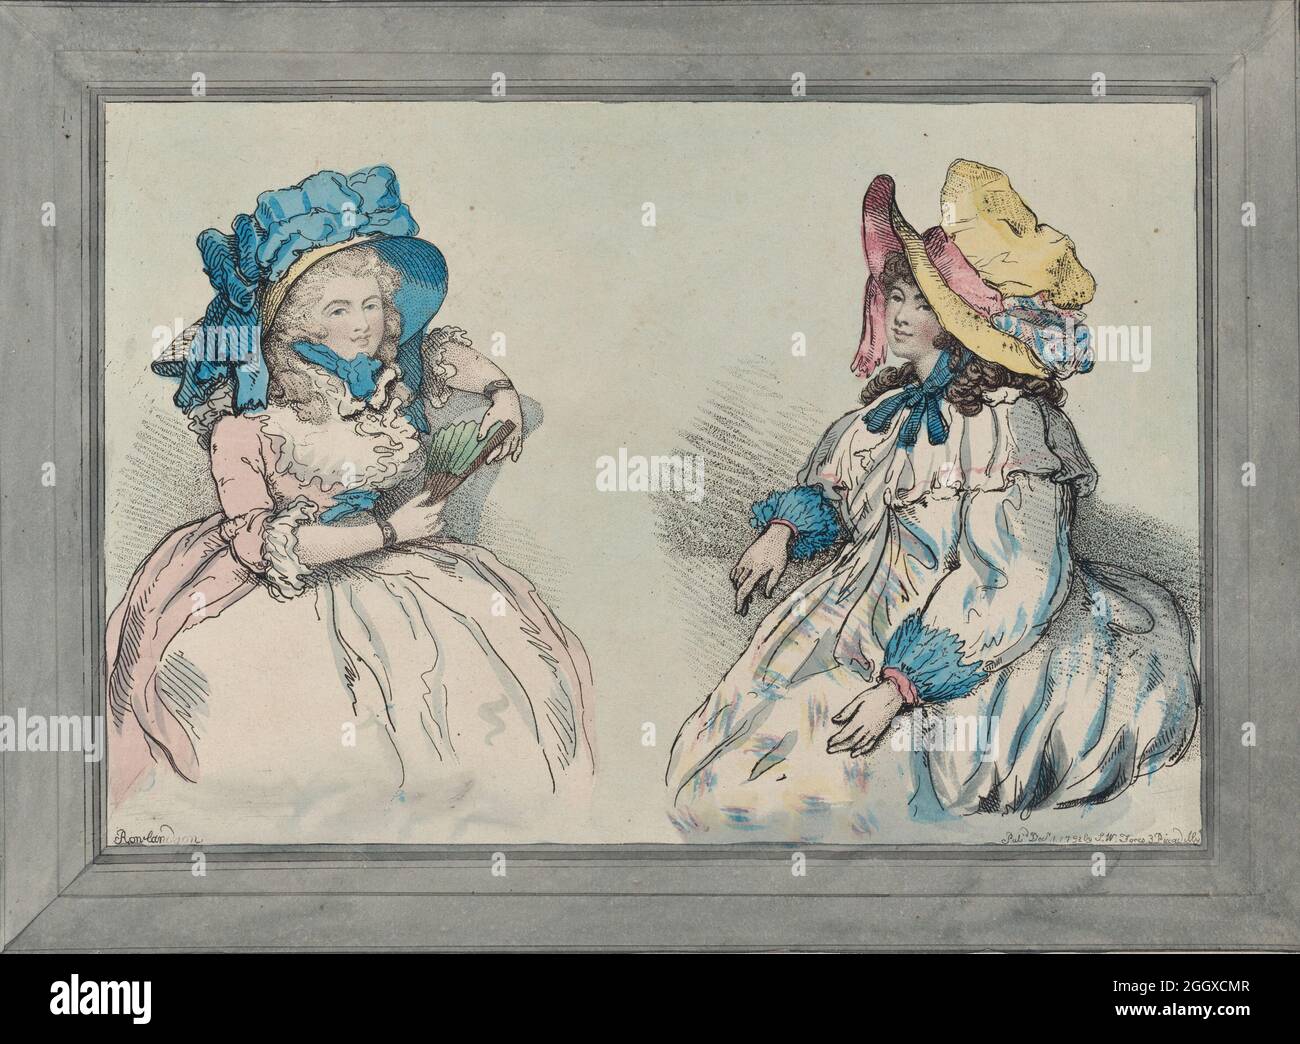 Beauties 1792 Artist: Thomas Rowlandson (1756-1827) an English artist and caricaturist of the Georgian Era. A social observer, he was a prolific artist and print maker.  Credit: Levenson Collection/Alamy Stock Photo